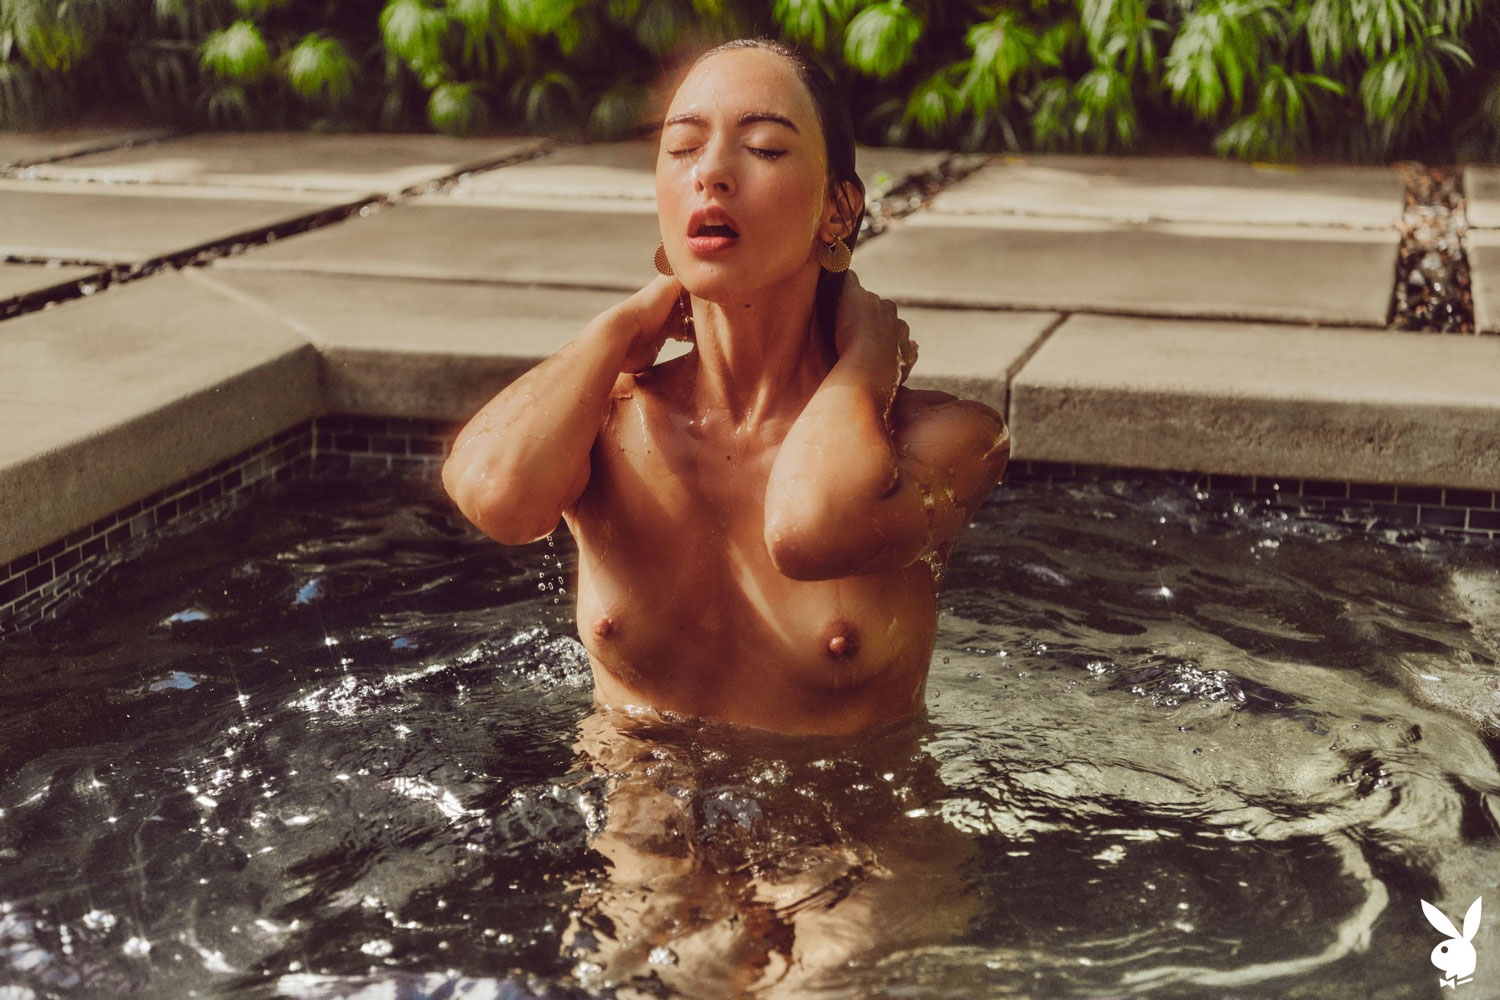 Genevieve Liberte Cools Down in the Pool